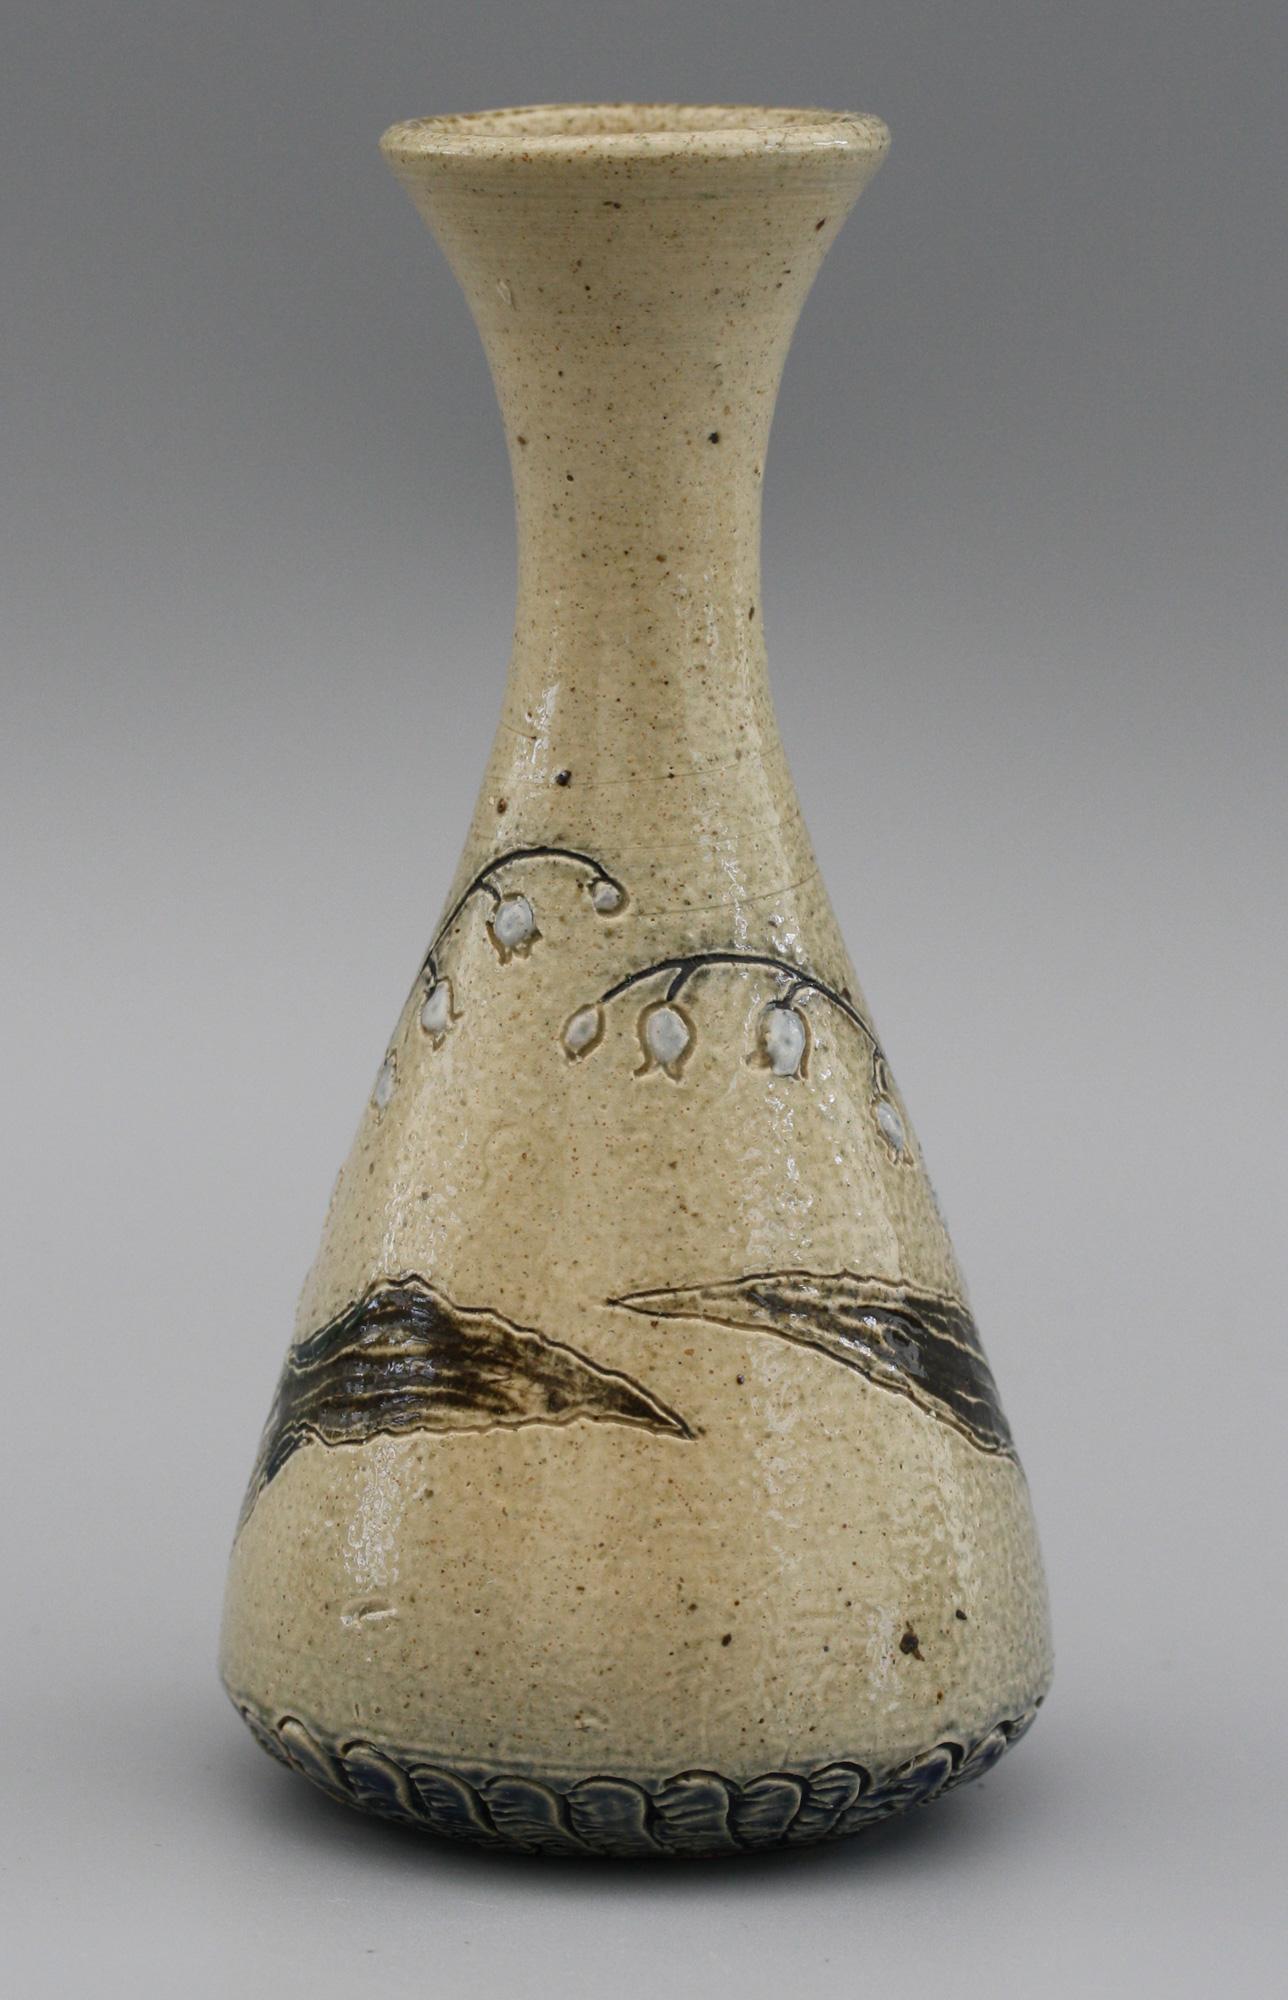 A Martin Brothers stoneware art pottery vase decorated with Lilies of the Valley and decorated in brown, blue and white glazes dating from the latter 19th century. The conical flask shaped bottle vase stands on a wide rounded foot with a patterned